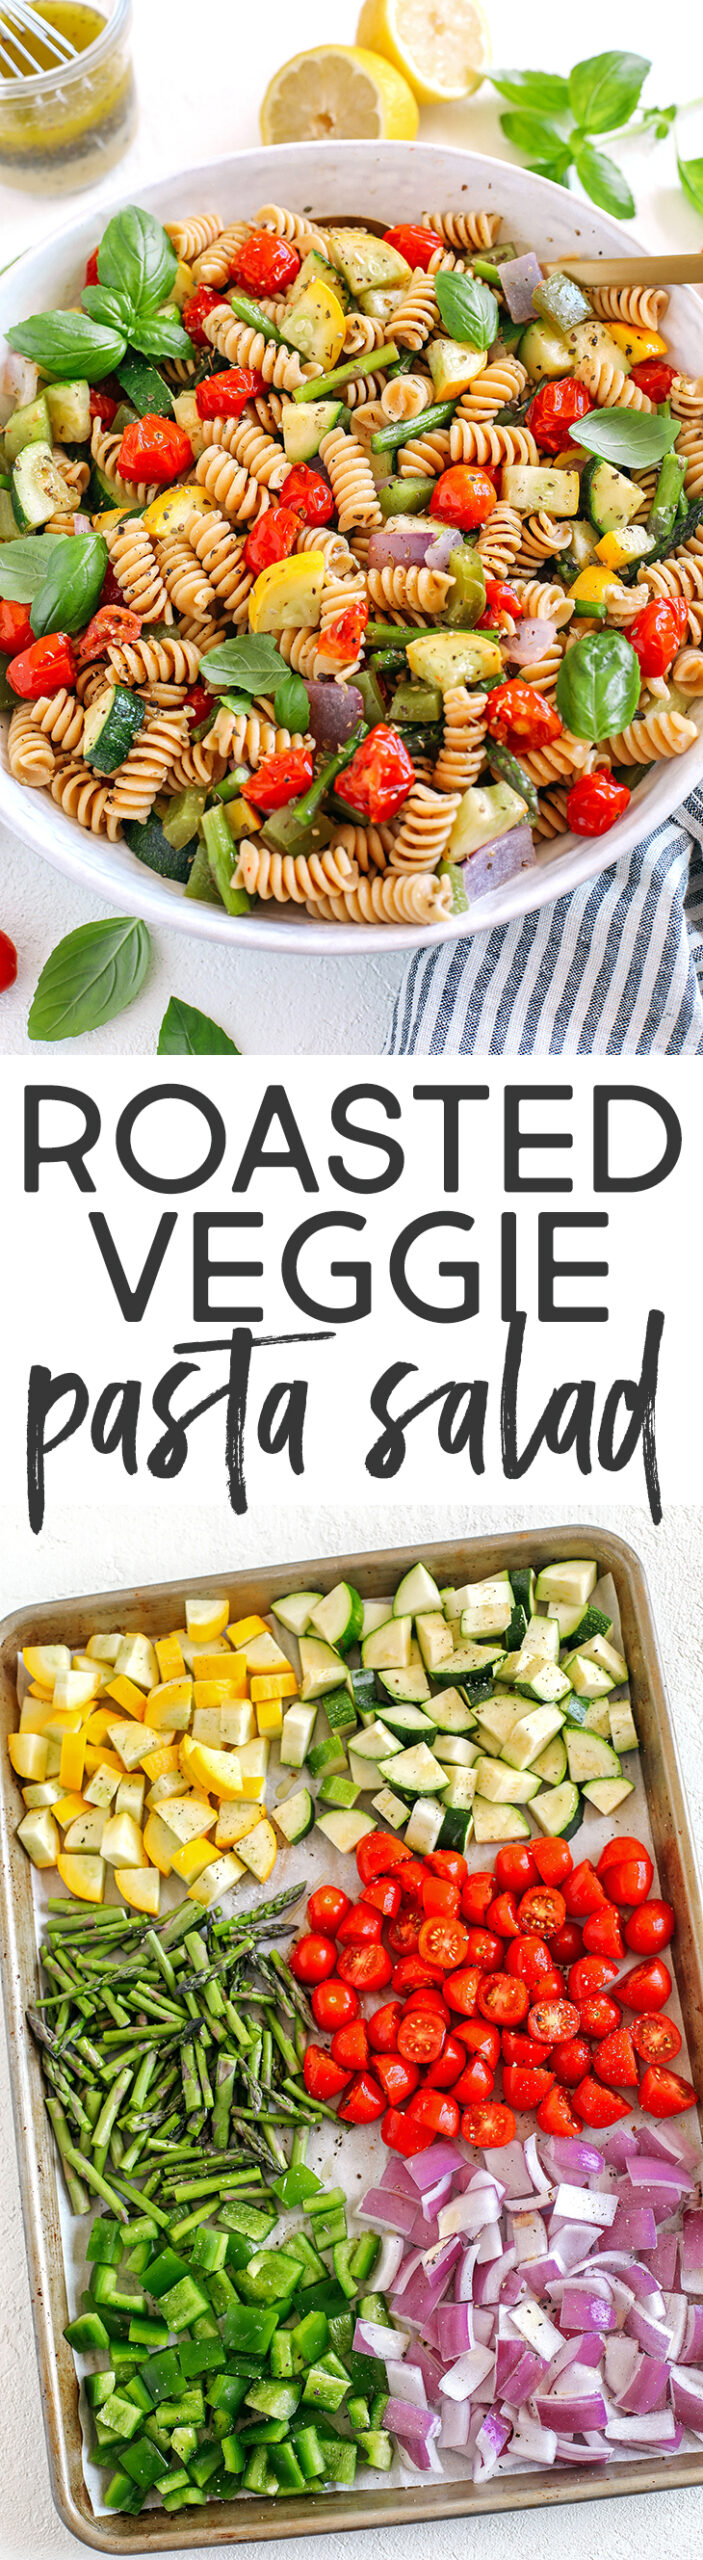 This EASY Roasted Veggie Pasta Salad is loaded with fresh ingredients like juicy tomatoes, zucchini, squash, asparagus, and bell pepper, all tossed together with a delicious lemon herb dressing!